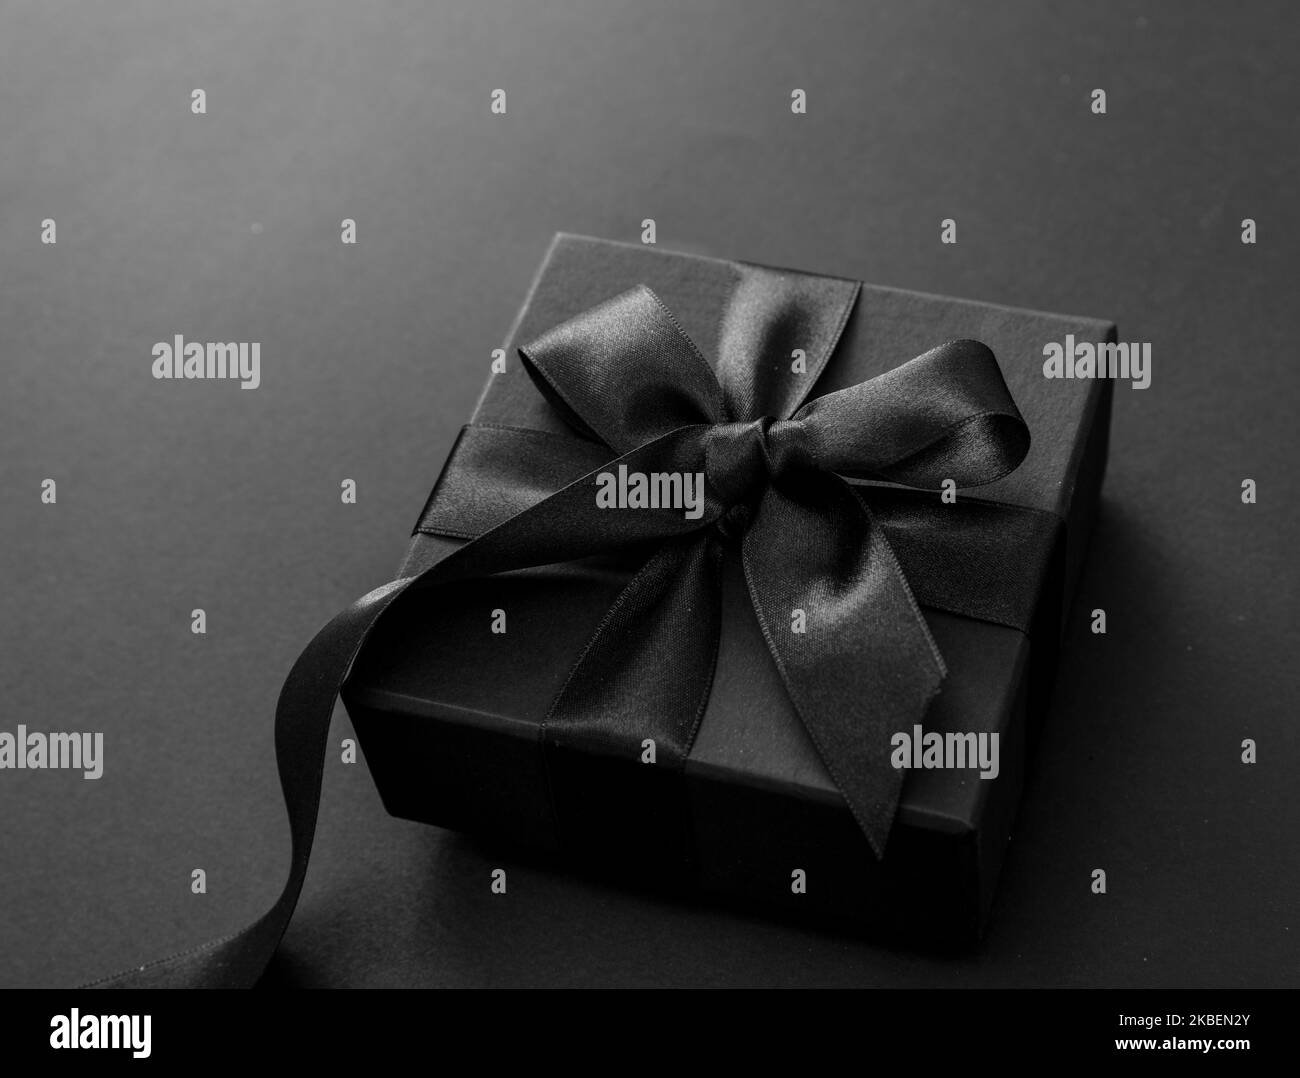 Black Friday Sale and Christmas presents concept. Gift box with black ribbon on red satin textile, close up view Stock Photo